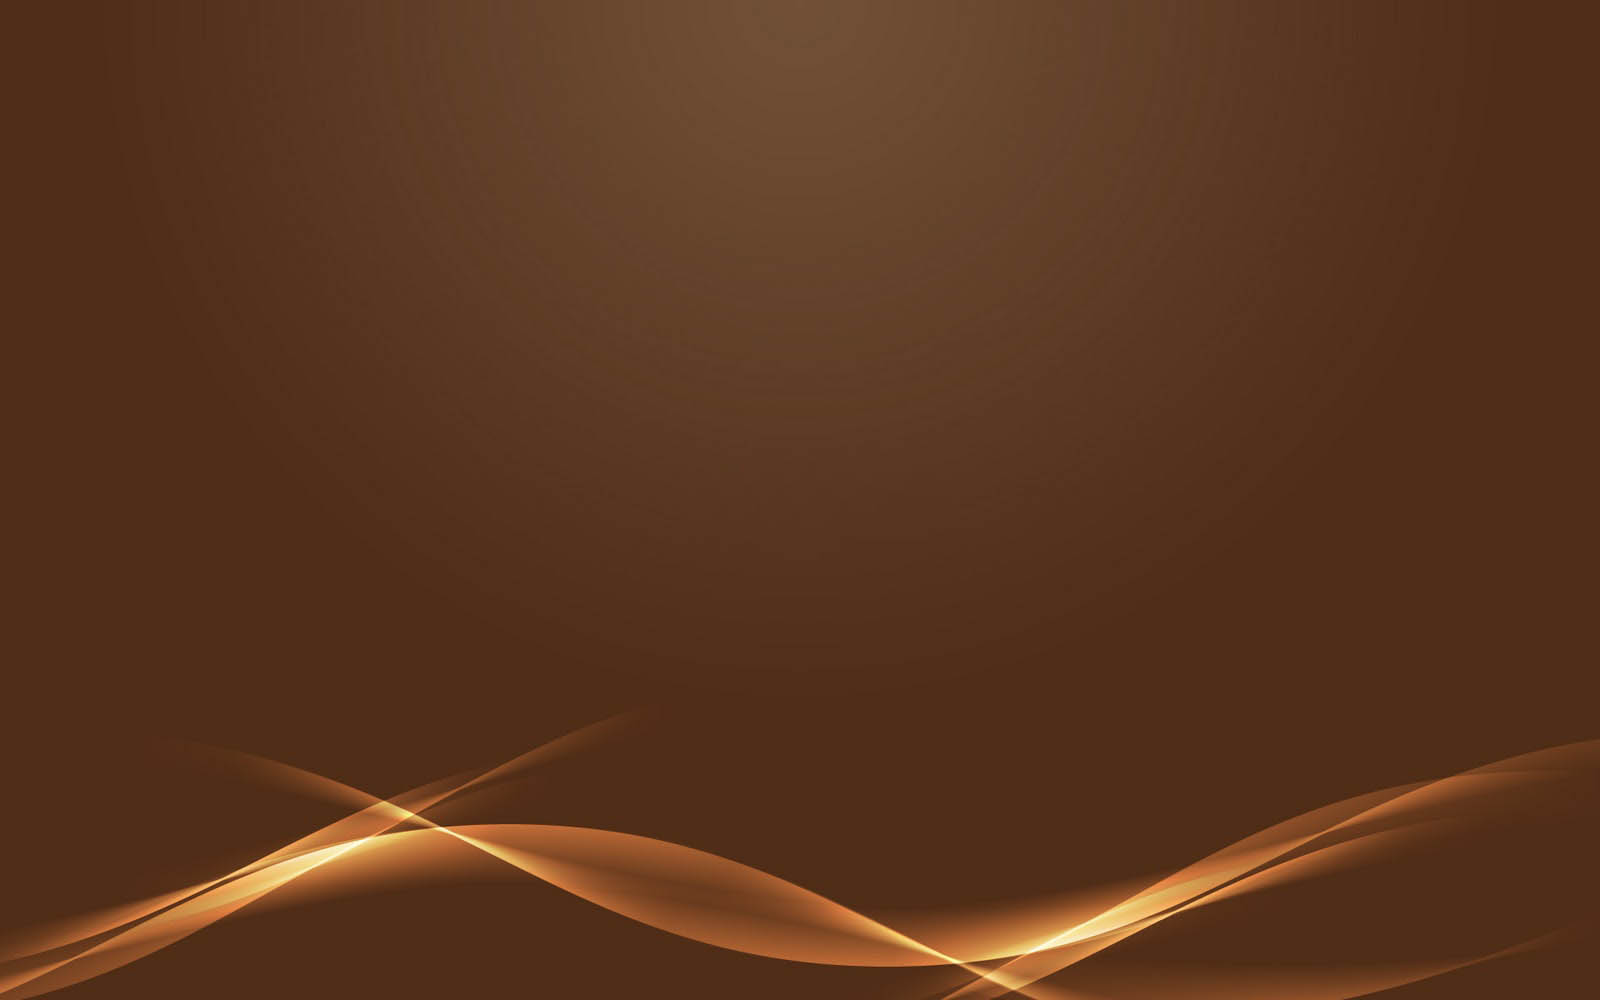 Tag Brown Wallpaper Background Paos Pictures And Image For